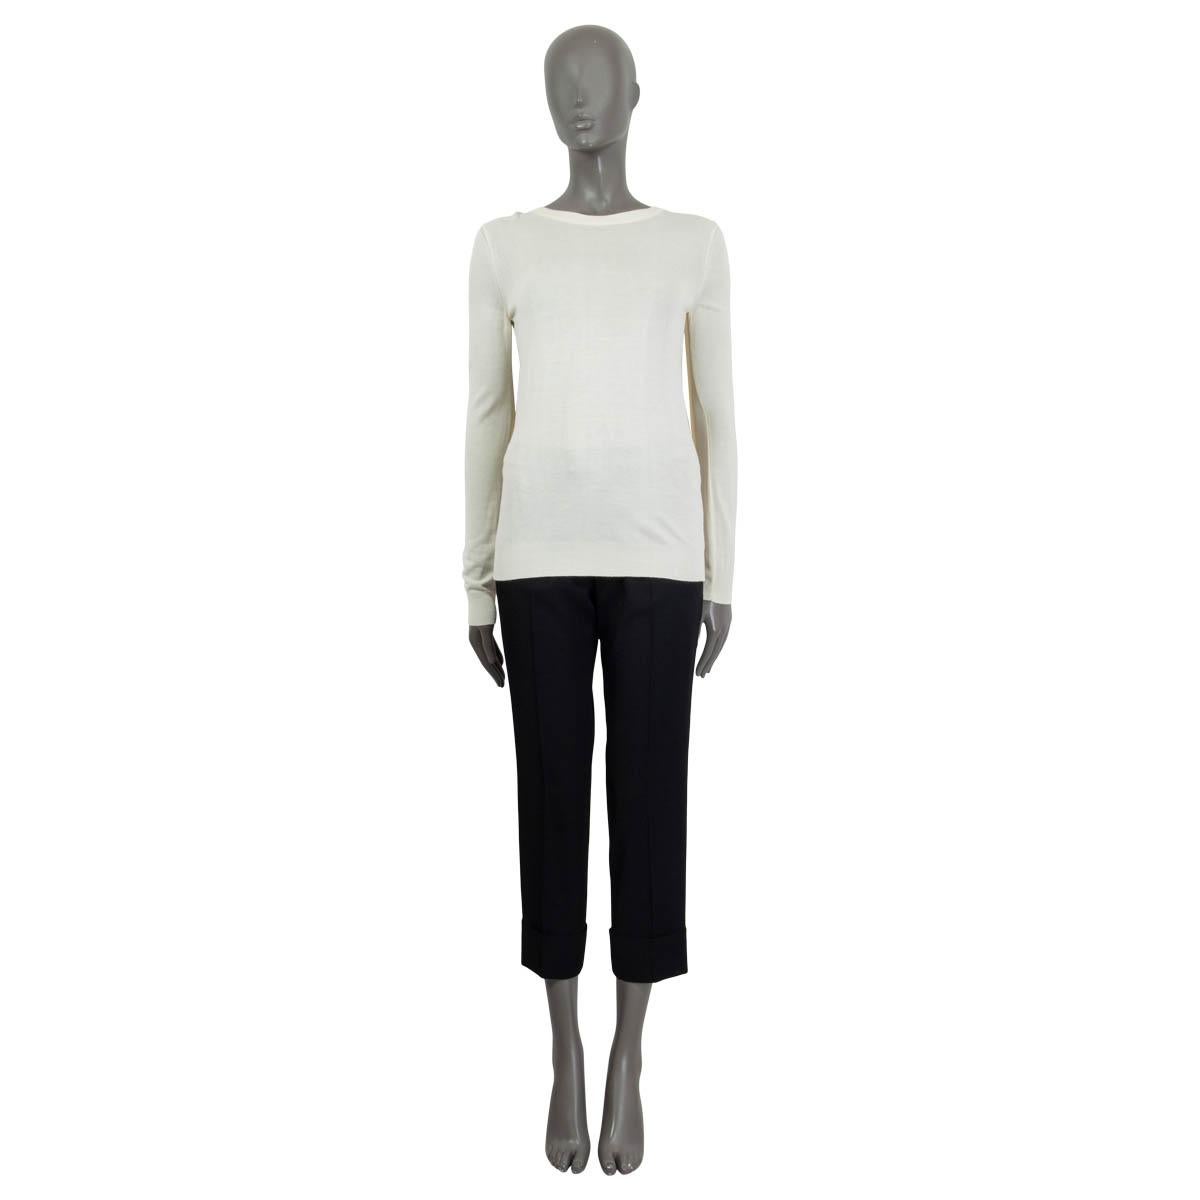 100% authentic Maison Margiela long sleeve knit sweater in ivory viscose (100%). Features a paneled cape at the back. Unlined. Has been worn and is in excellent condition.

Measurements
Tag Size	S
Size	S
Shoulder Width	38cm (14.8in)
Bust	84cm